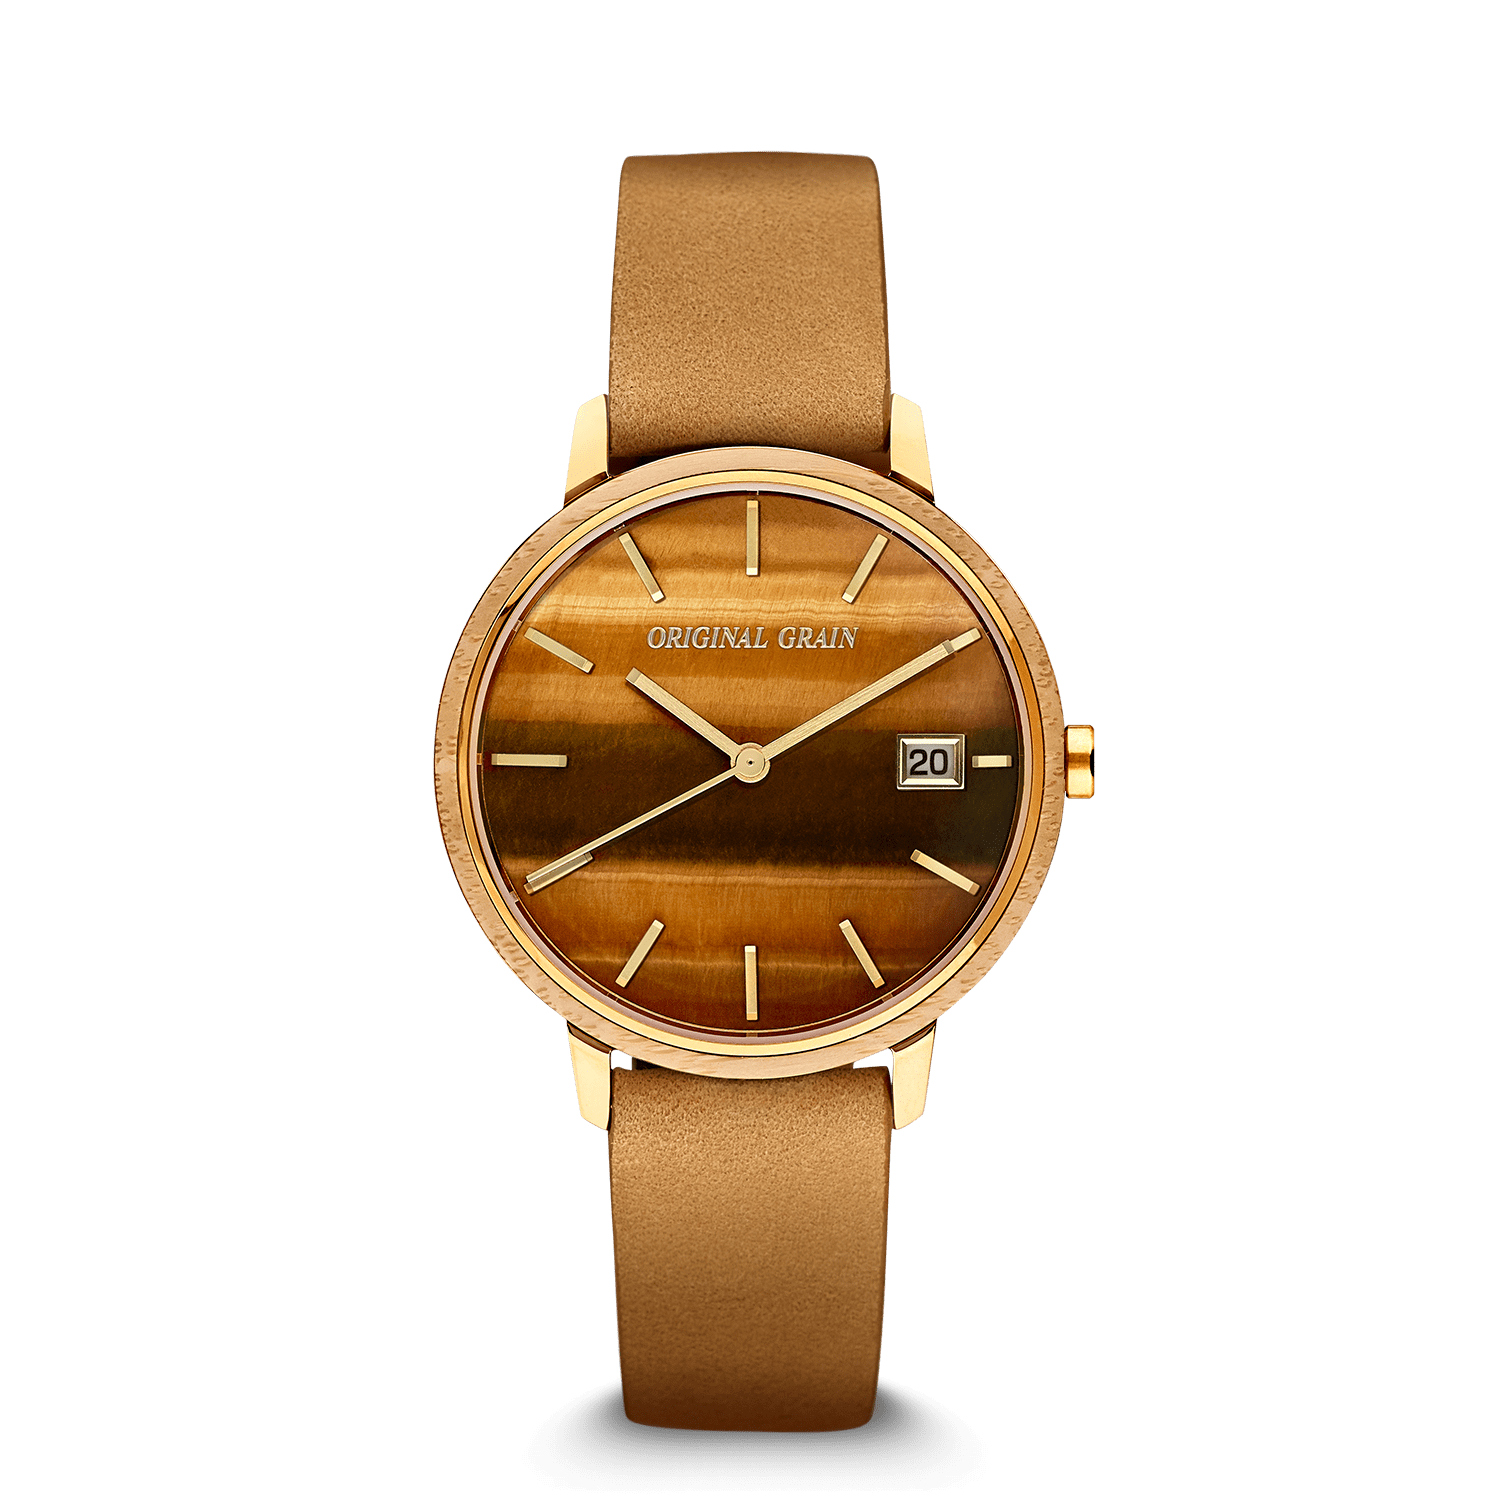 MNML X-Series Sandwich Dial Face | Anniversary watches, Time piece, Series